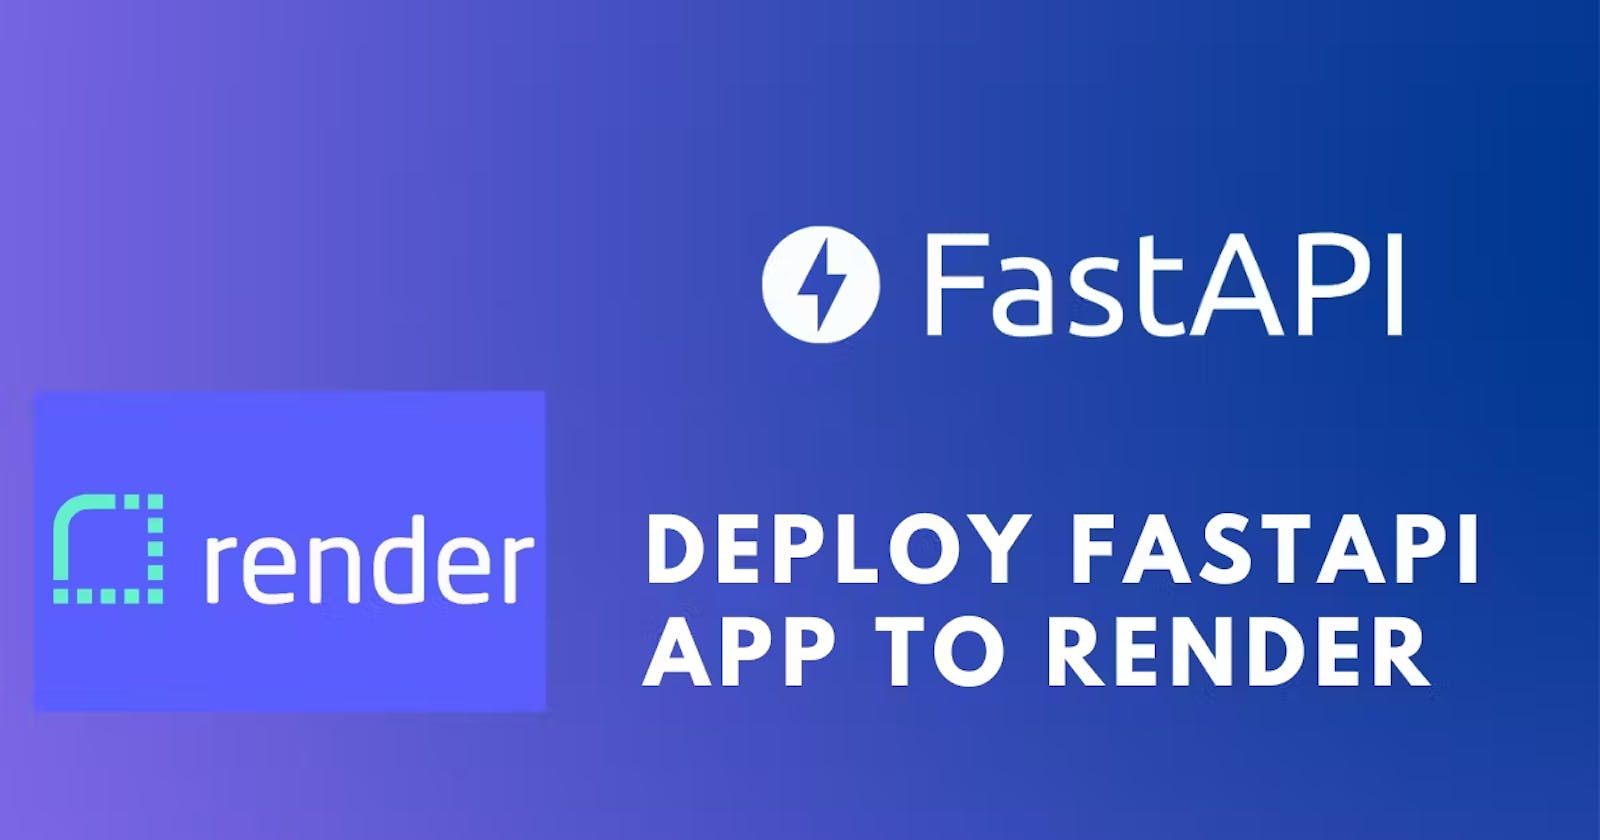 Deploying a FASTAPI Application on Render: Step-by-Step Guide